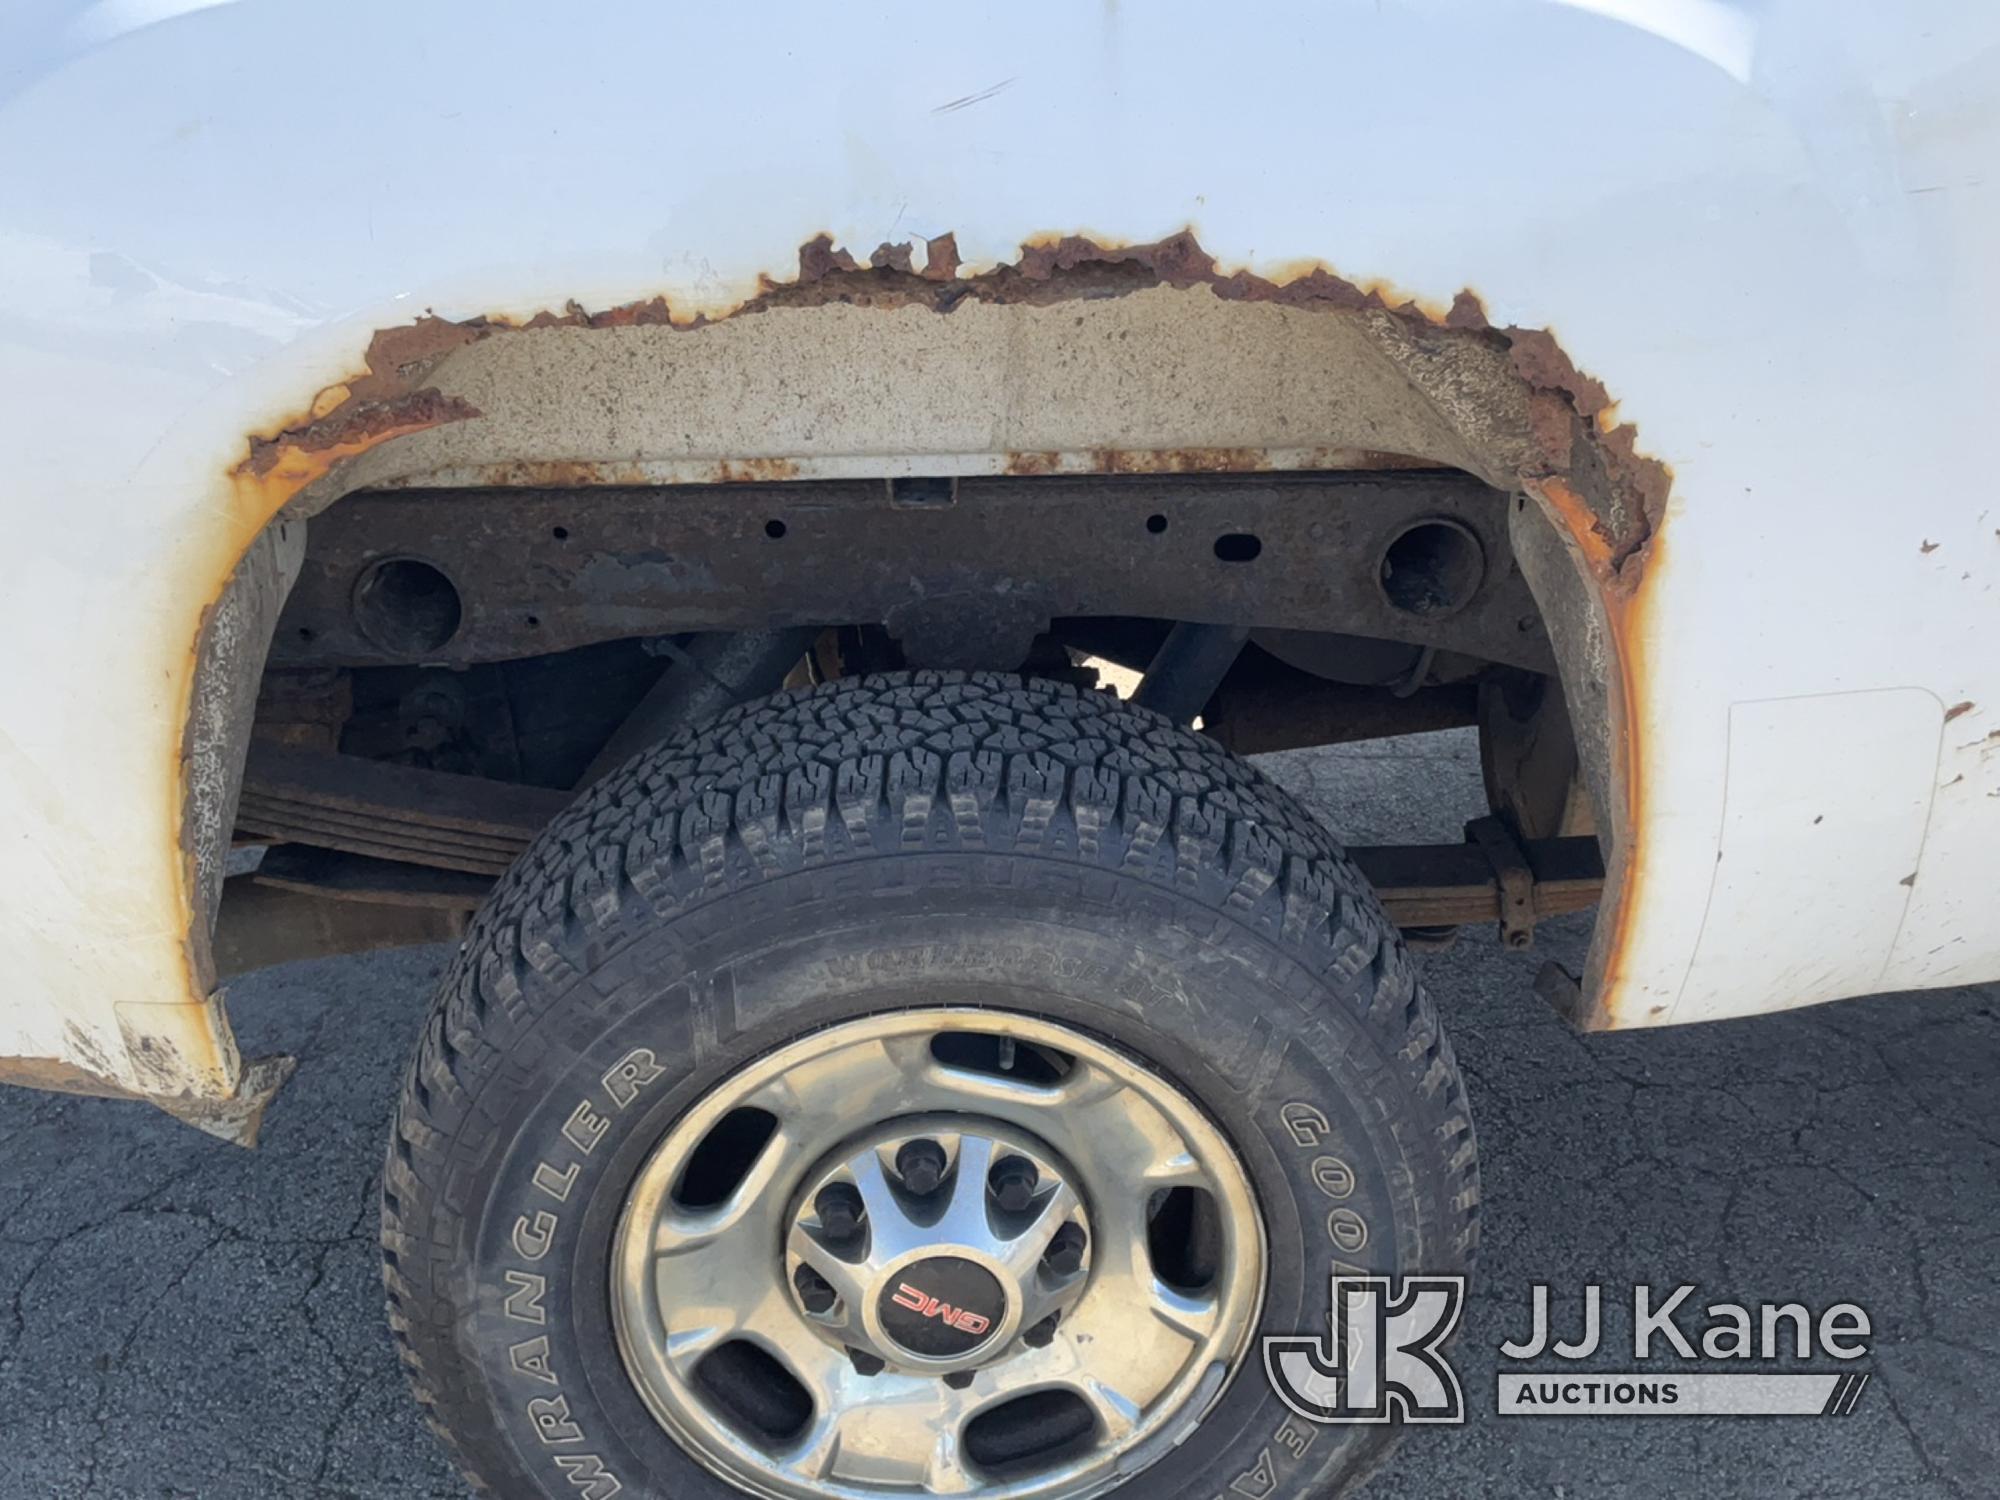 (South Beloit, IL) 2011 GMC Sierra 2500HD Extended-Cab Pickup Truck Runs) (Difficult to Move-Brakes